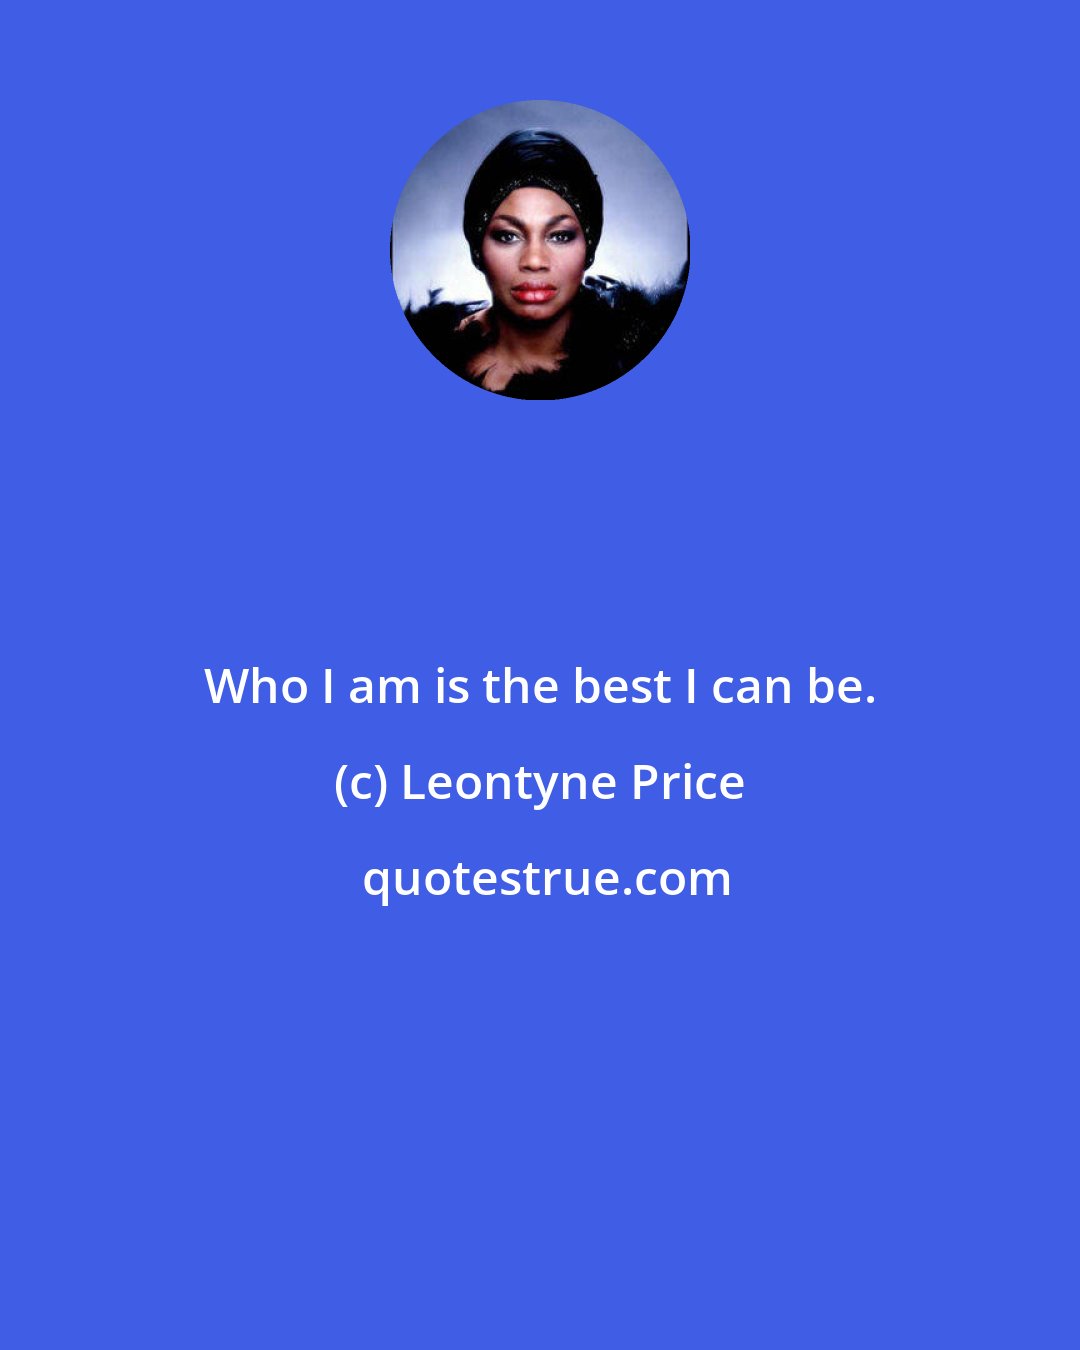 Leontyne Price: Who I am is the best I can be.